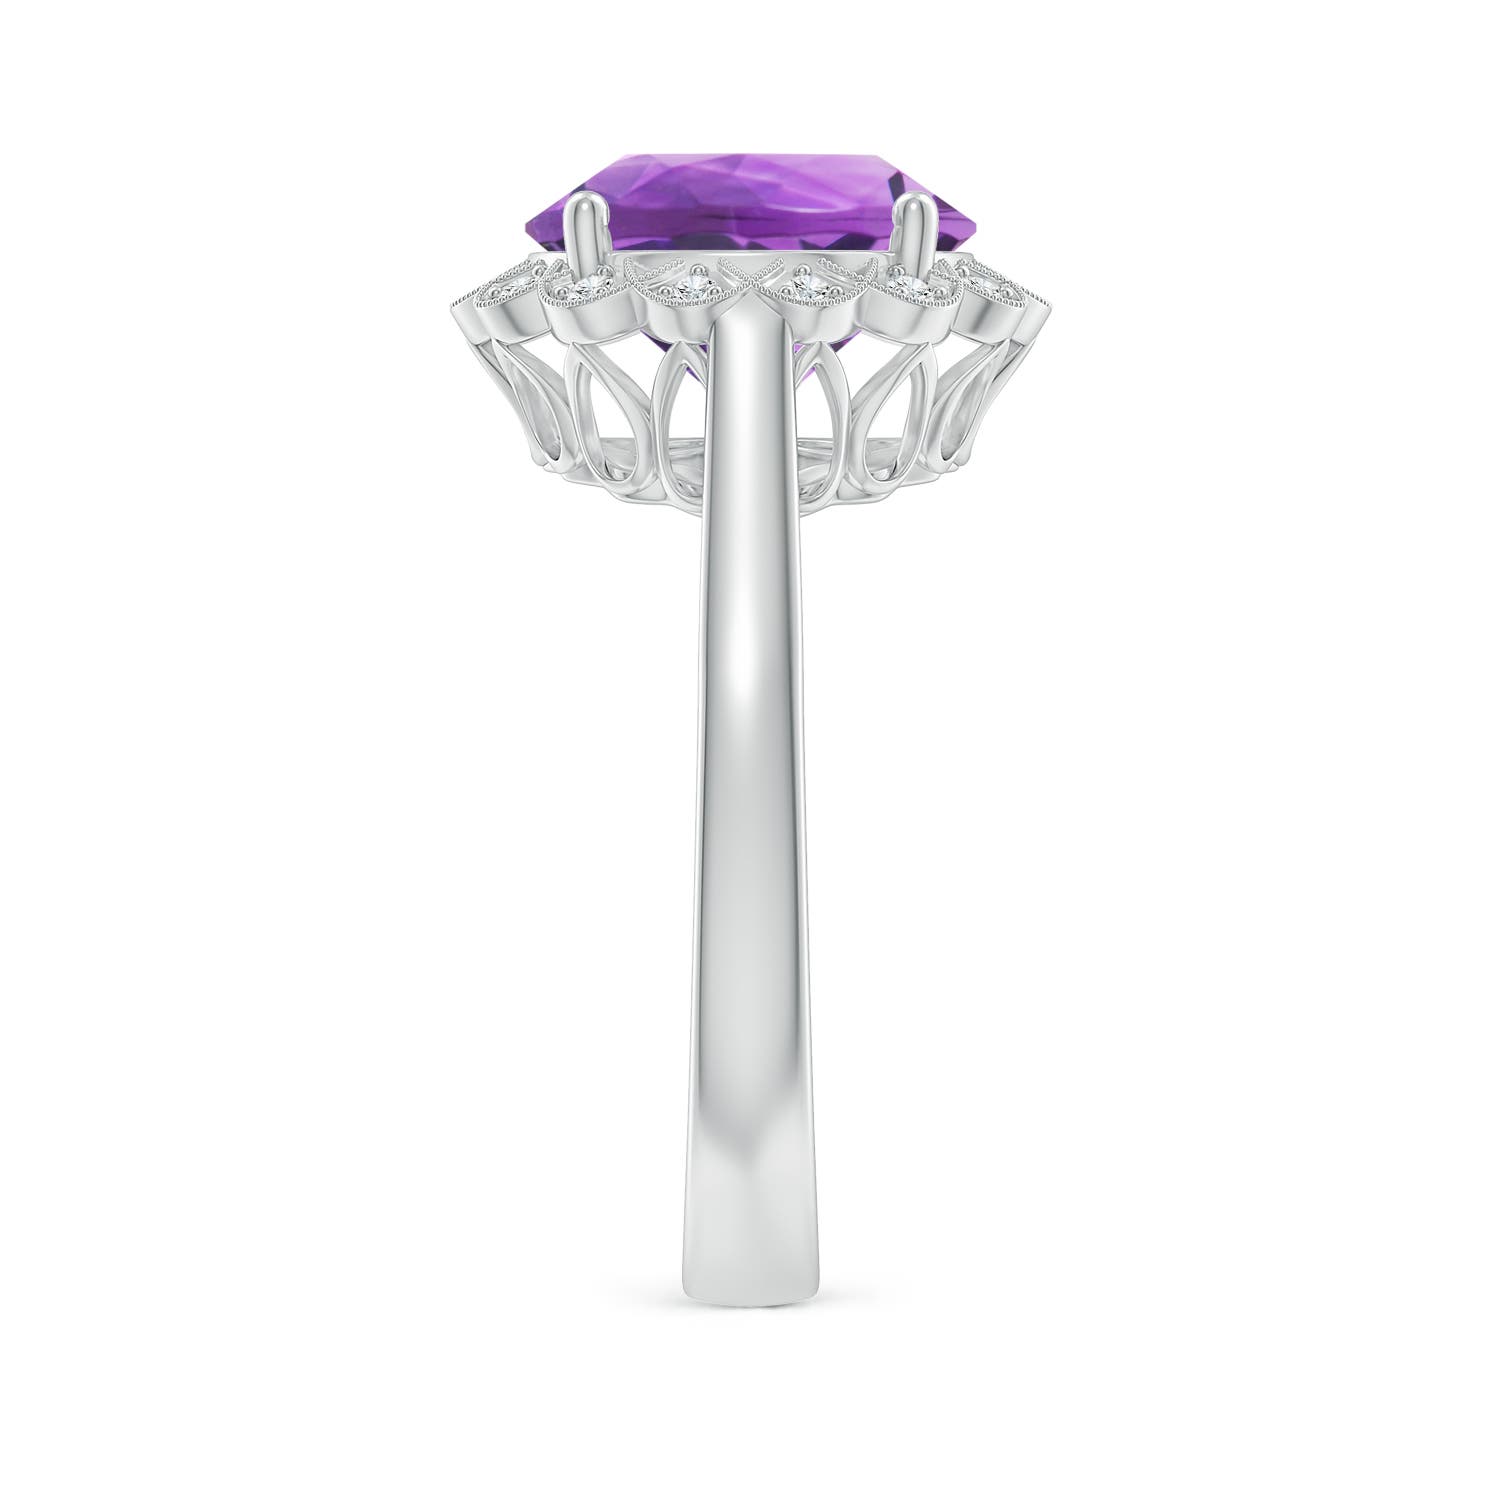 AA - Amethyst / 3.28 CT / 14 KT White Gold